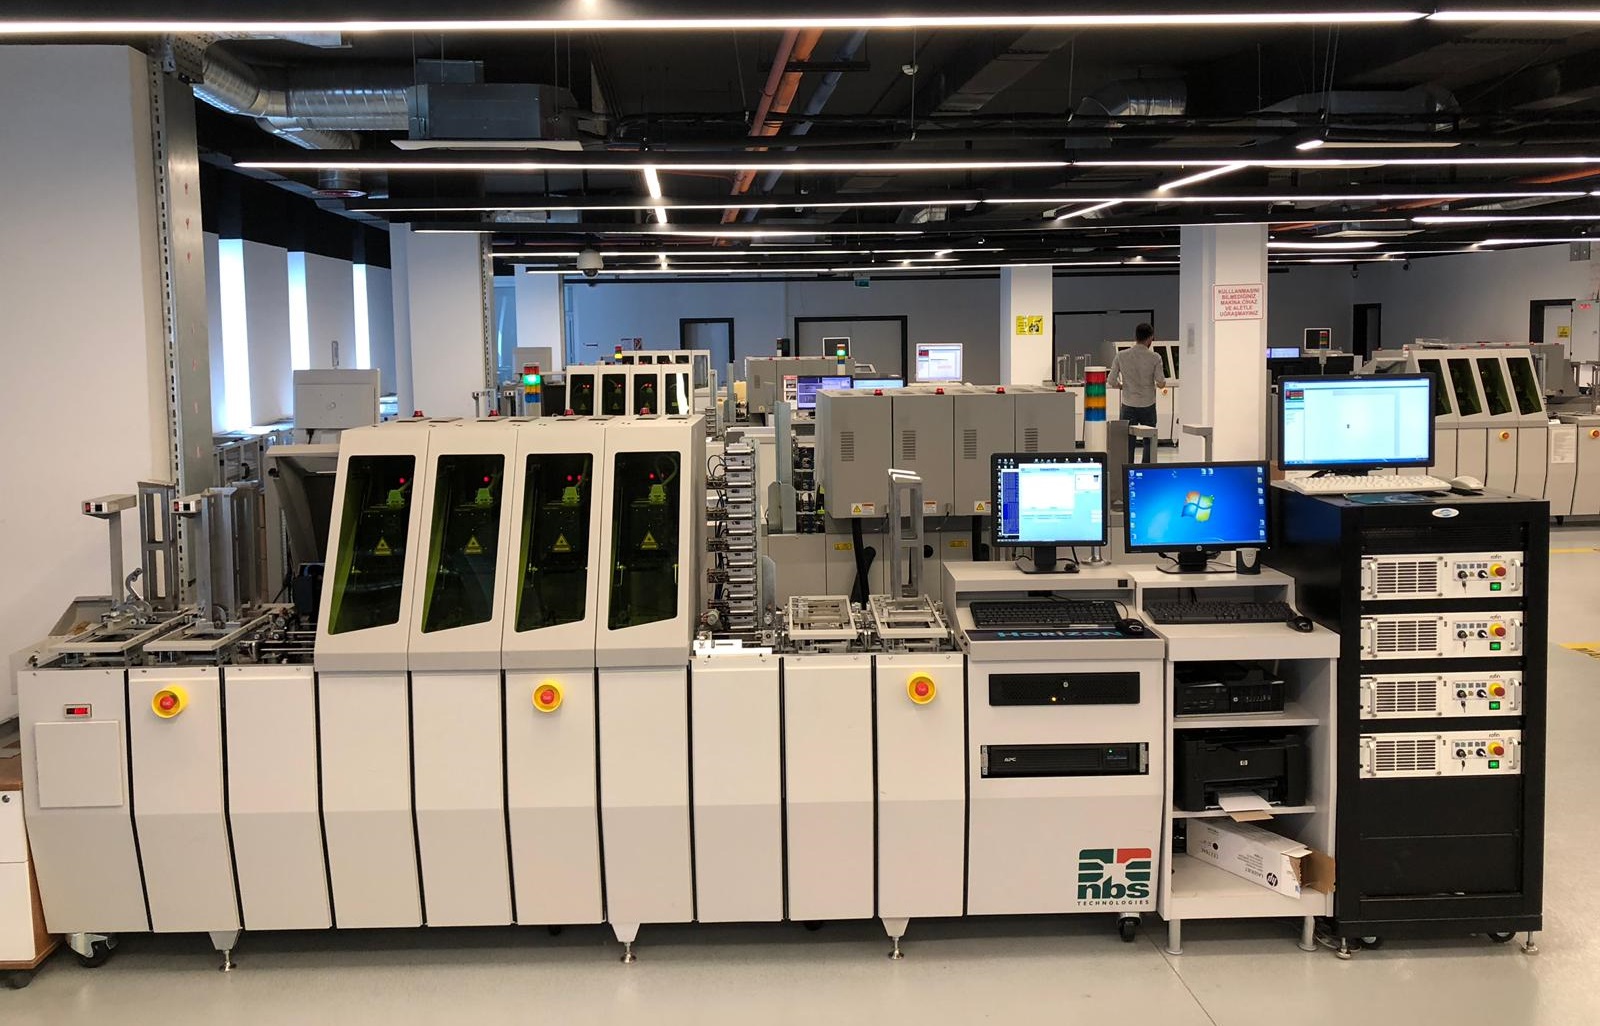  Republic of Turkey New Chip ID Card Production Continues